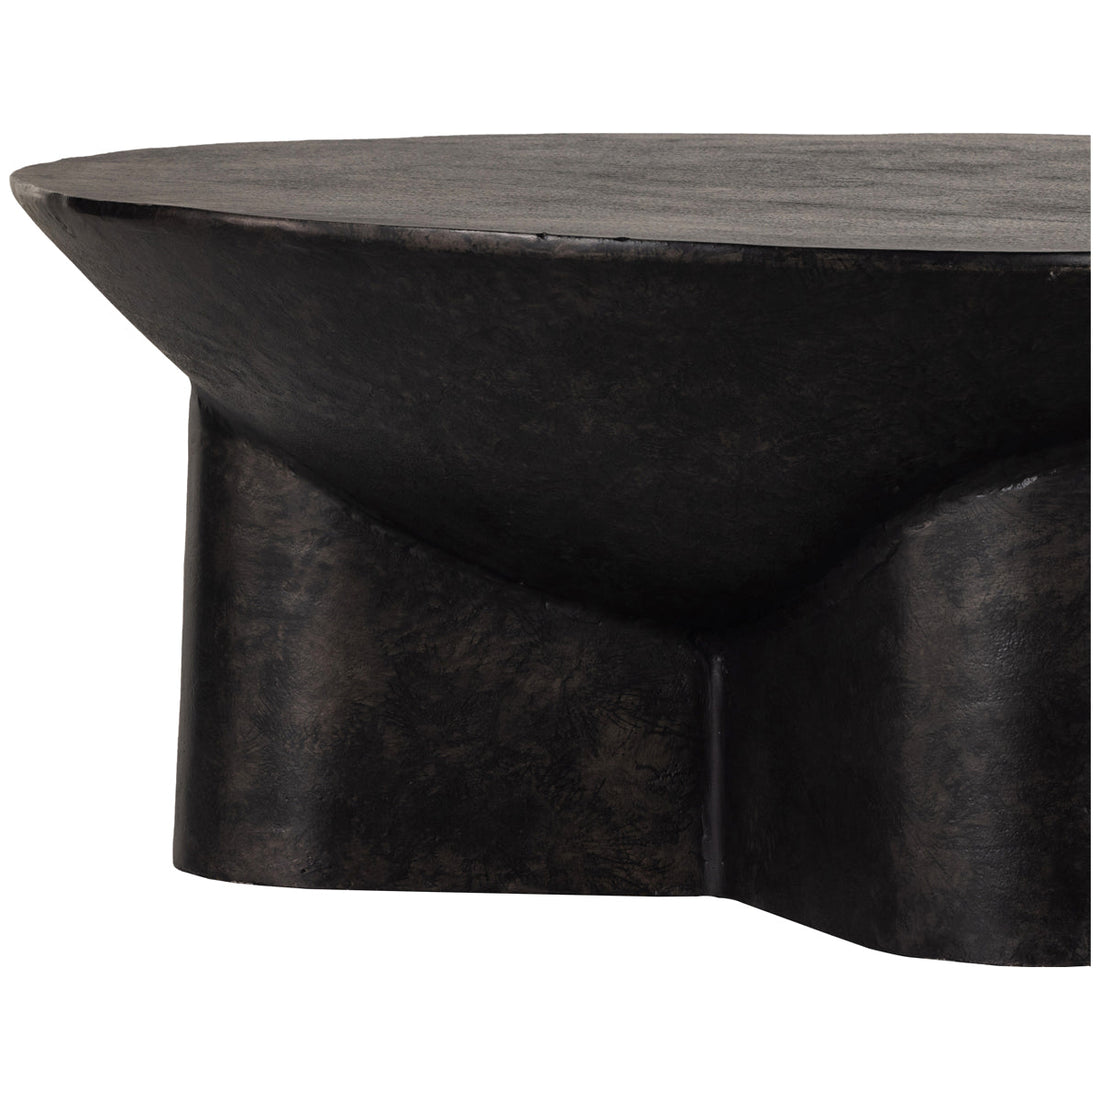 Four Hands Marlow Sante 36-Inch Coffee Table - Raw Black